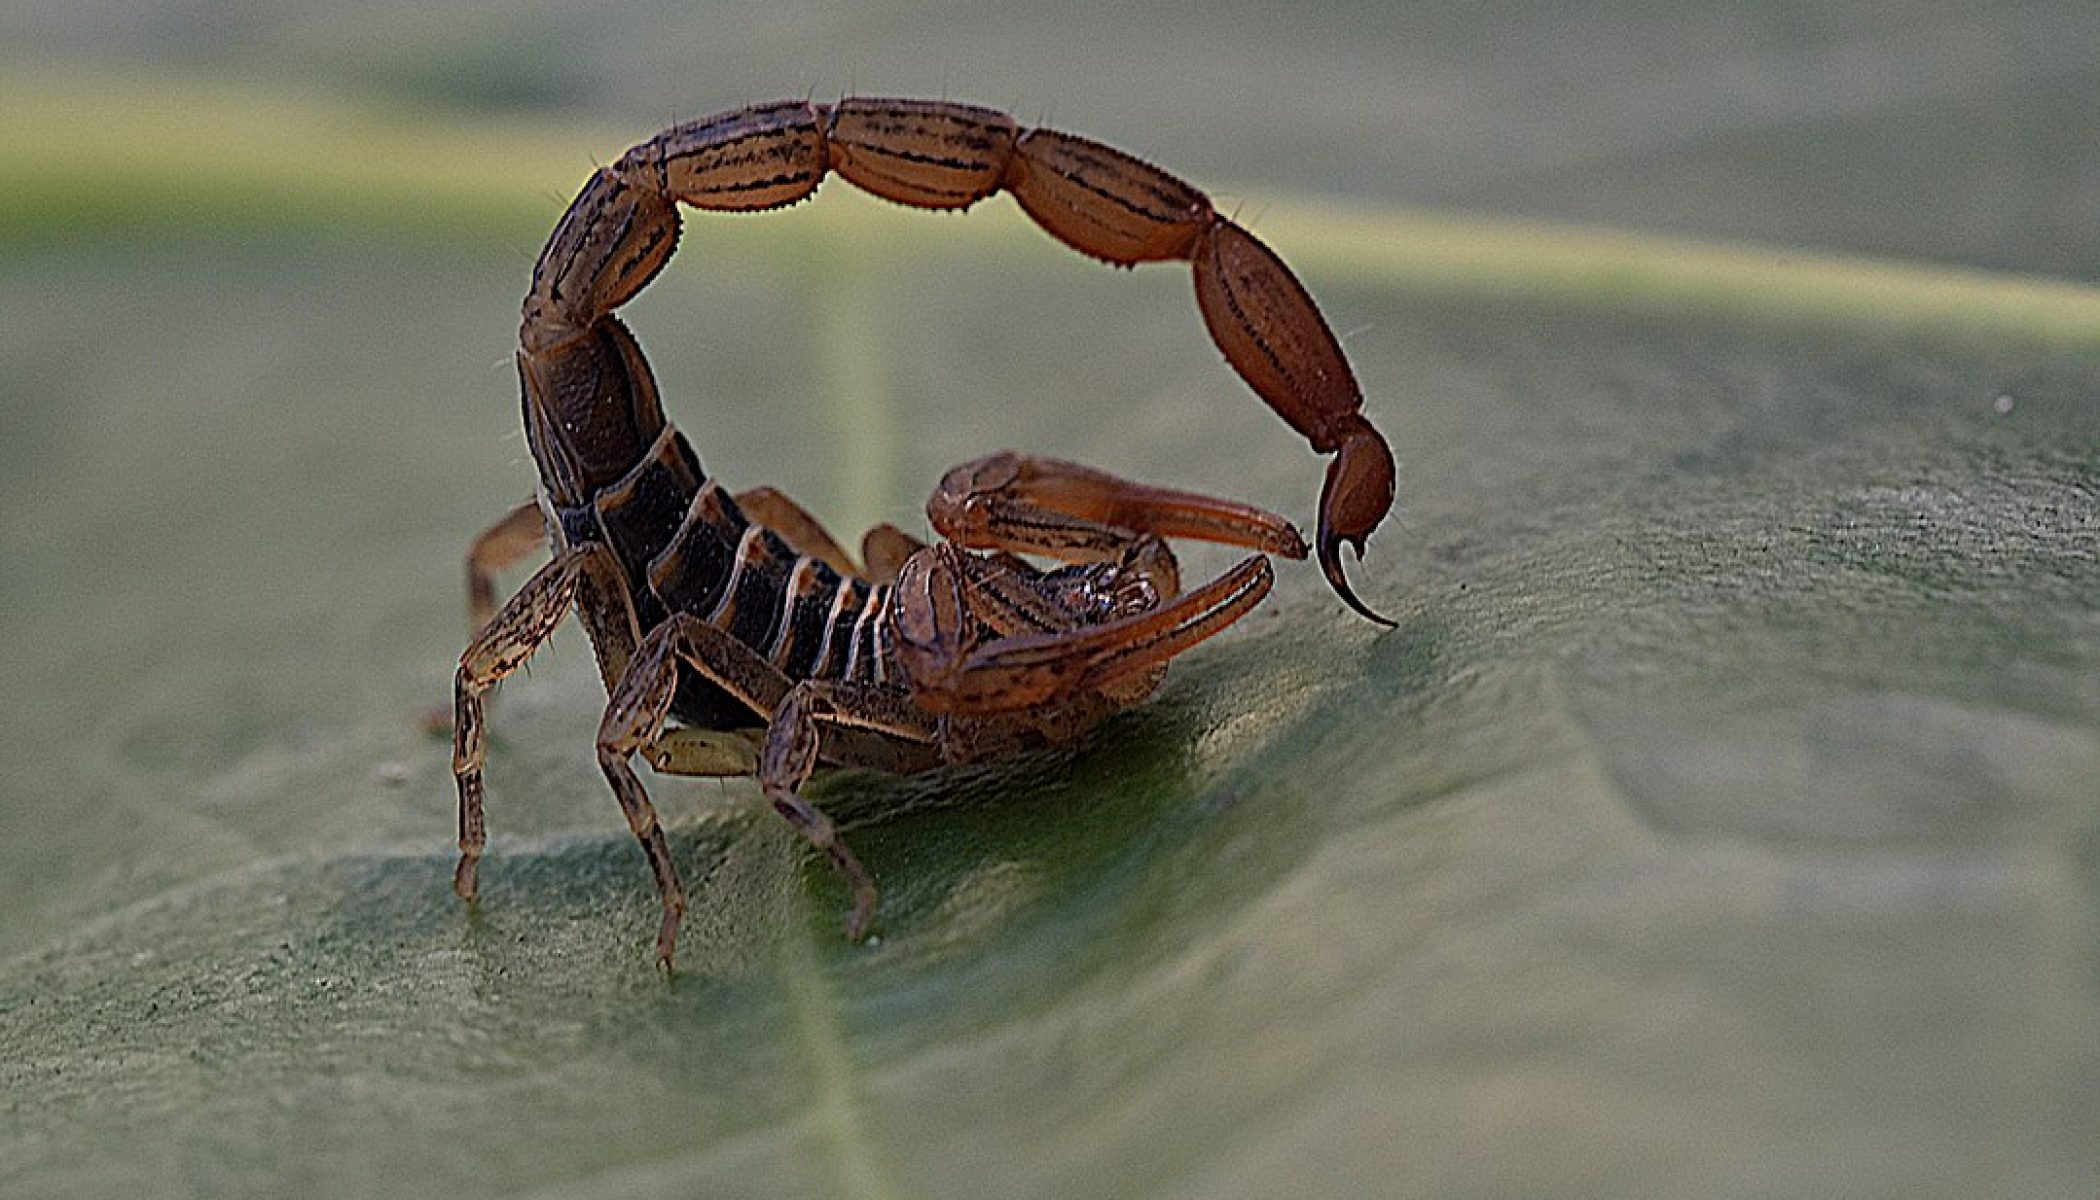 do all scorpions travel in pairs